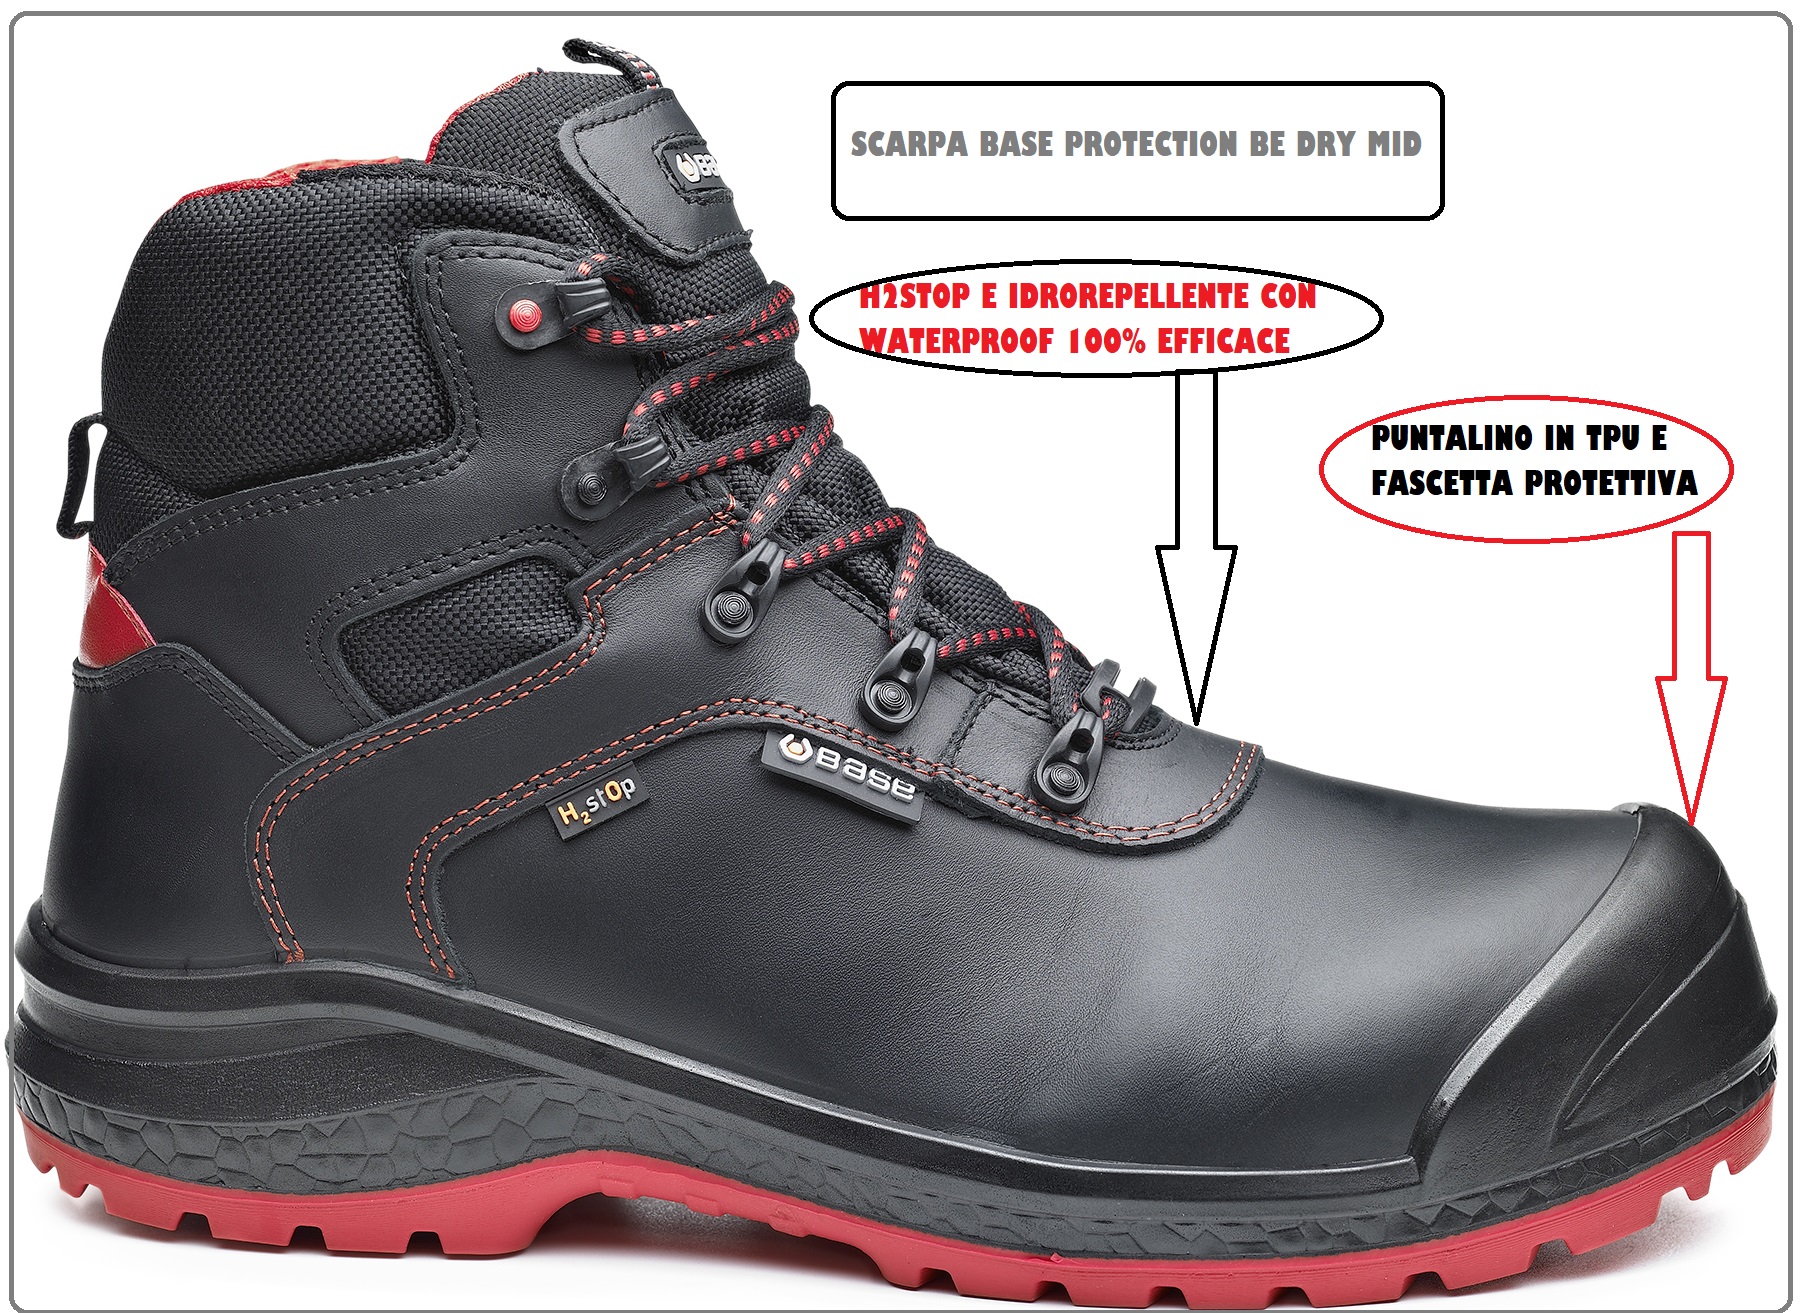 SCARPA BASE PROTECTION BE DRY MID